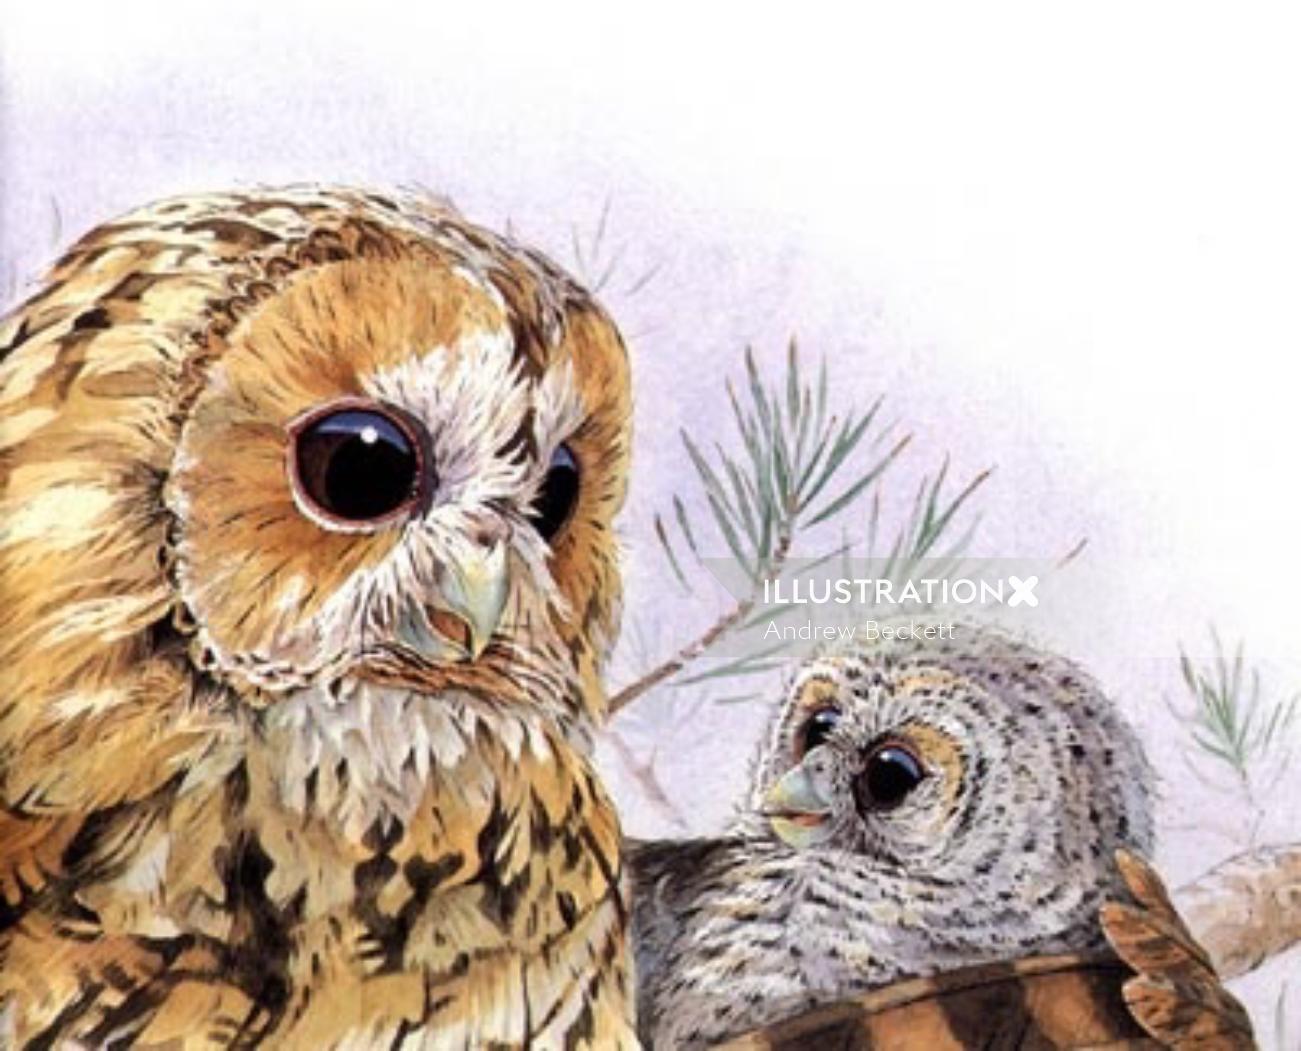 Graphic illustration of owl with baby owl